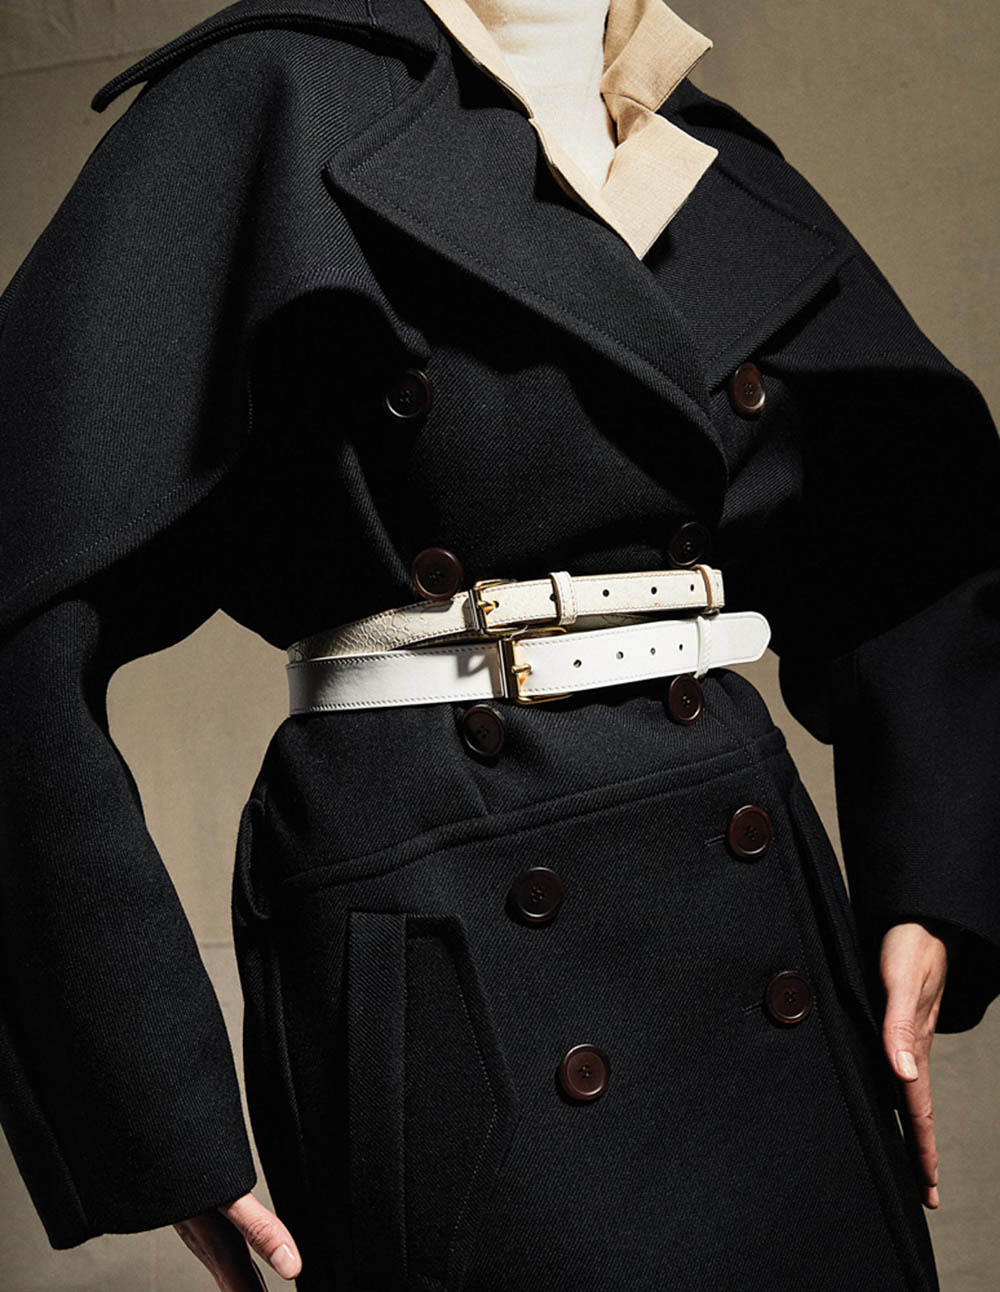 ''Belted Bold Leathers Shape Up Fall Coats'' by Hanna Tveite for WSJ. Magazine August 2018